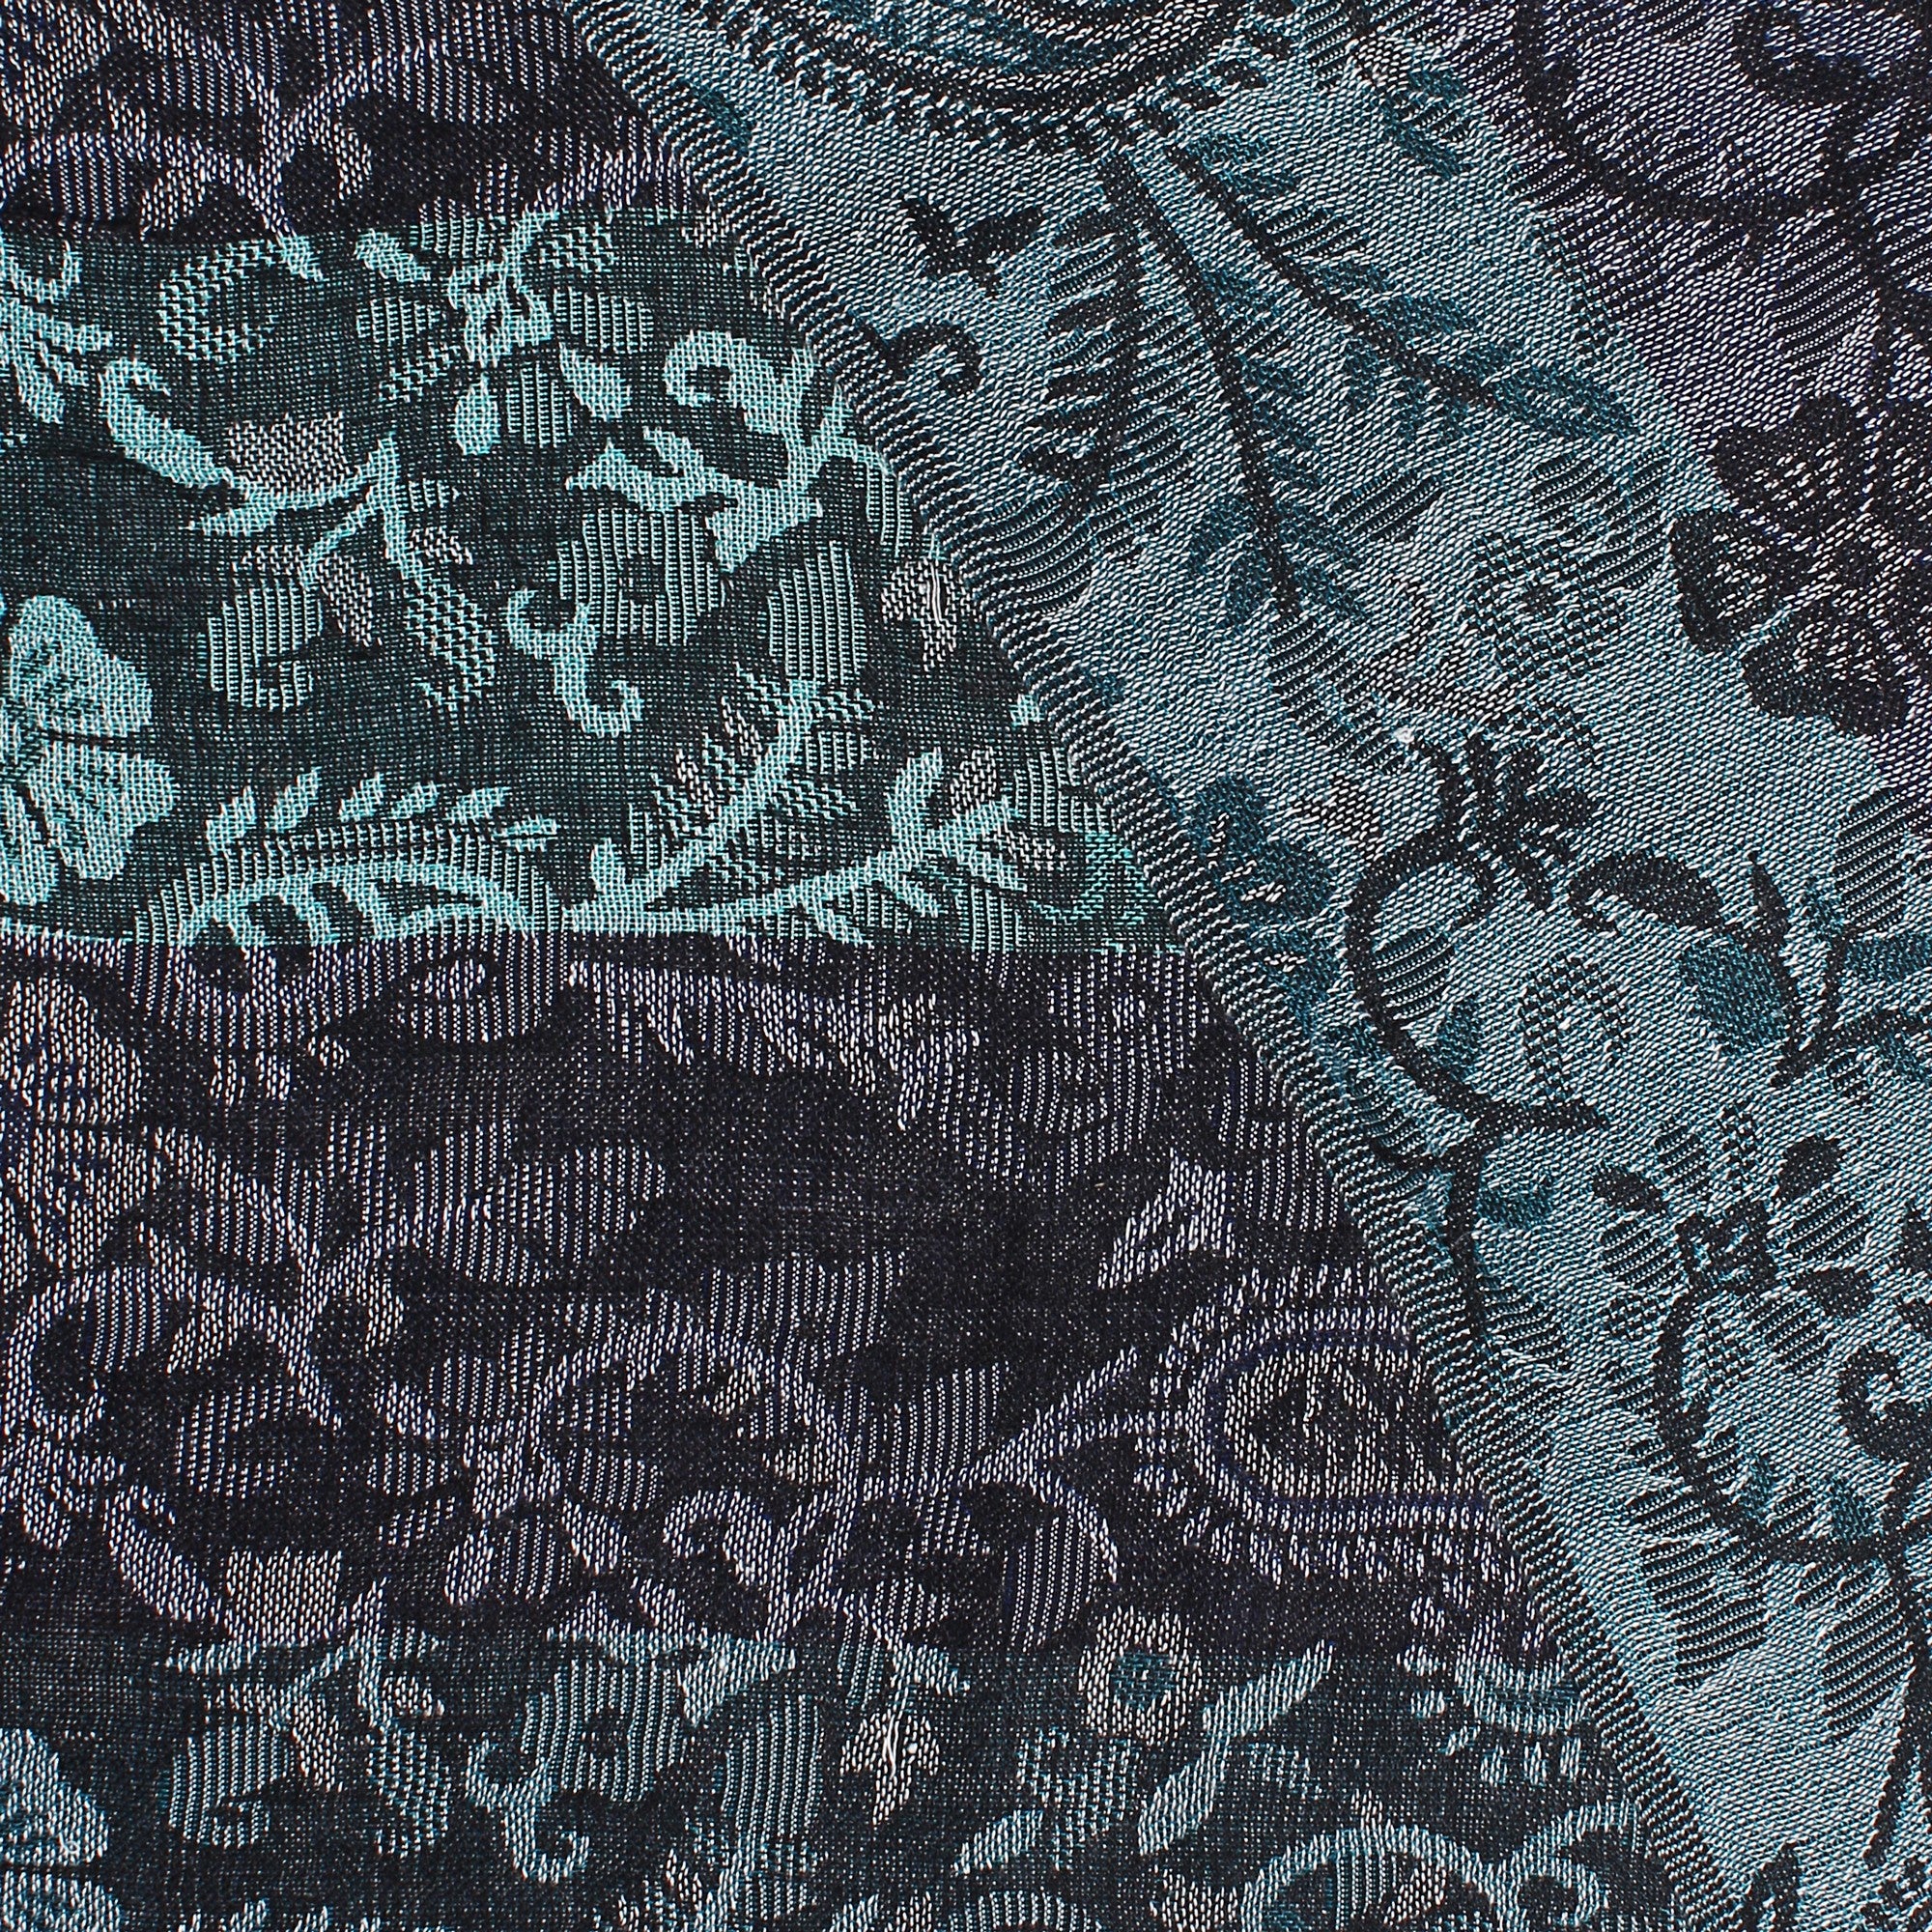 Enchanting Forest Nights Paisley Scarf